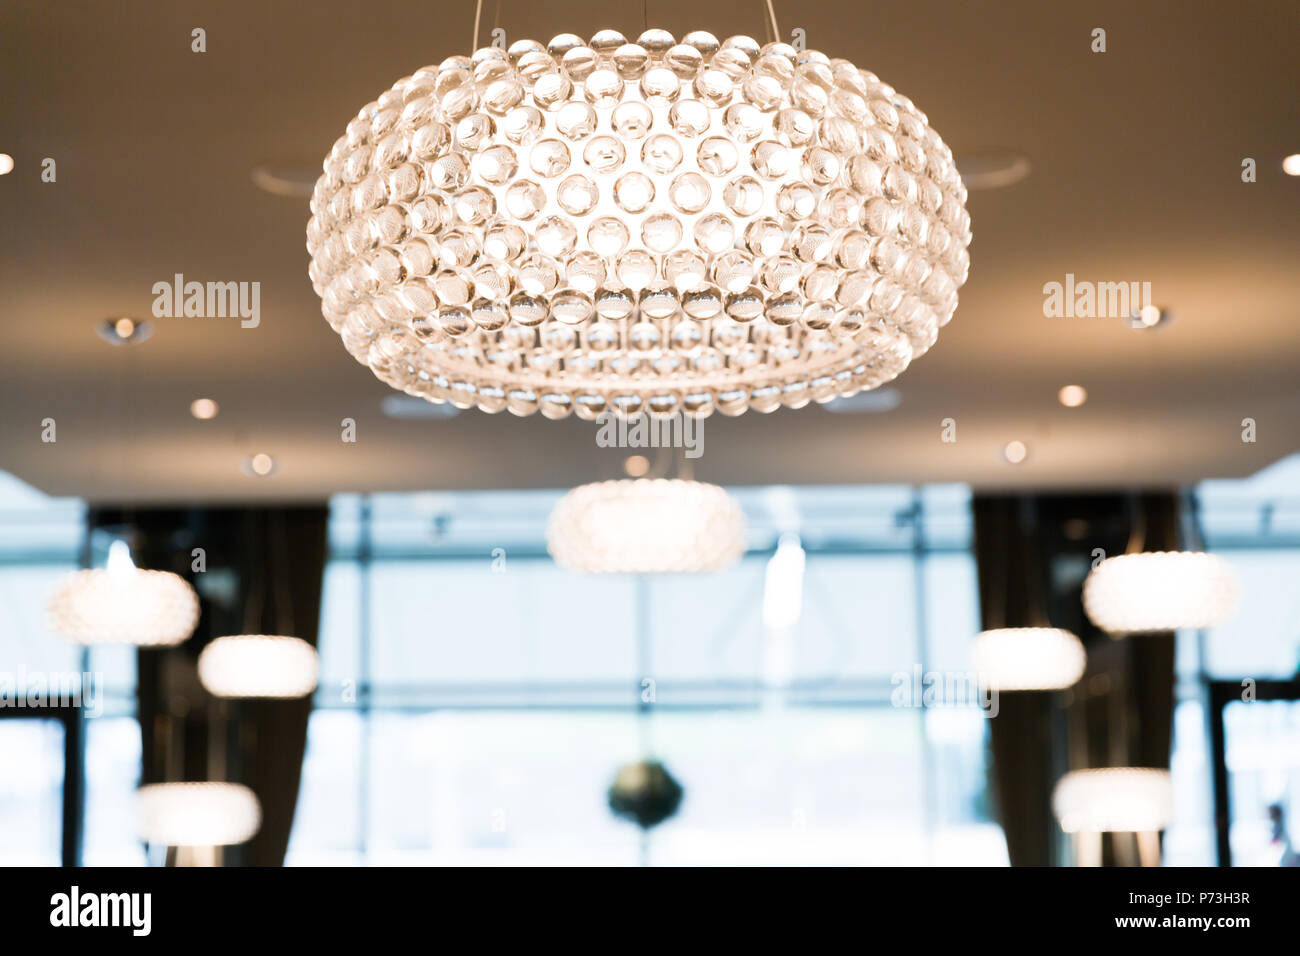 Brightly Lit Round Ceiling Lighting in Restaurant with Blurred Background Stock Photo